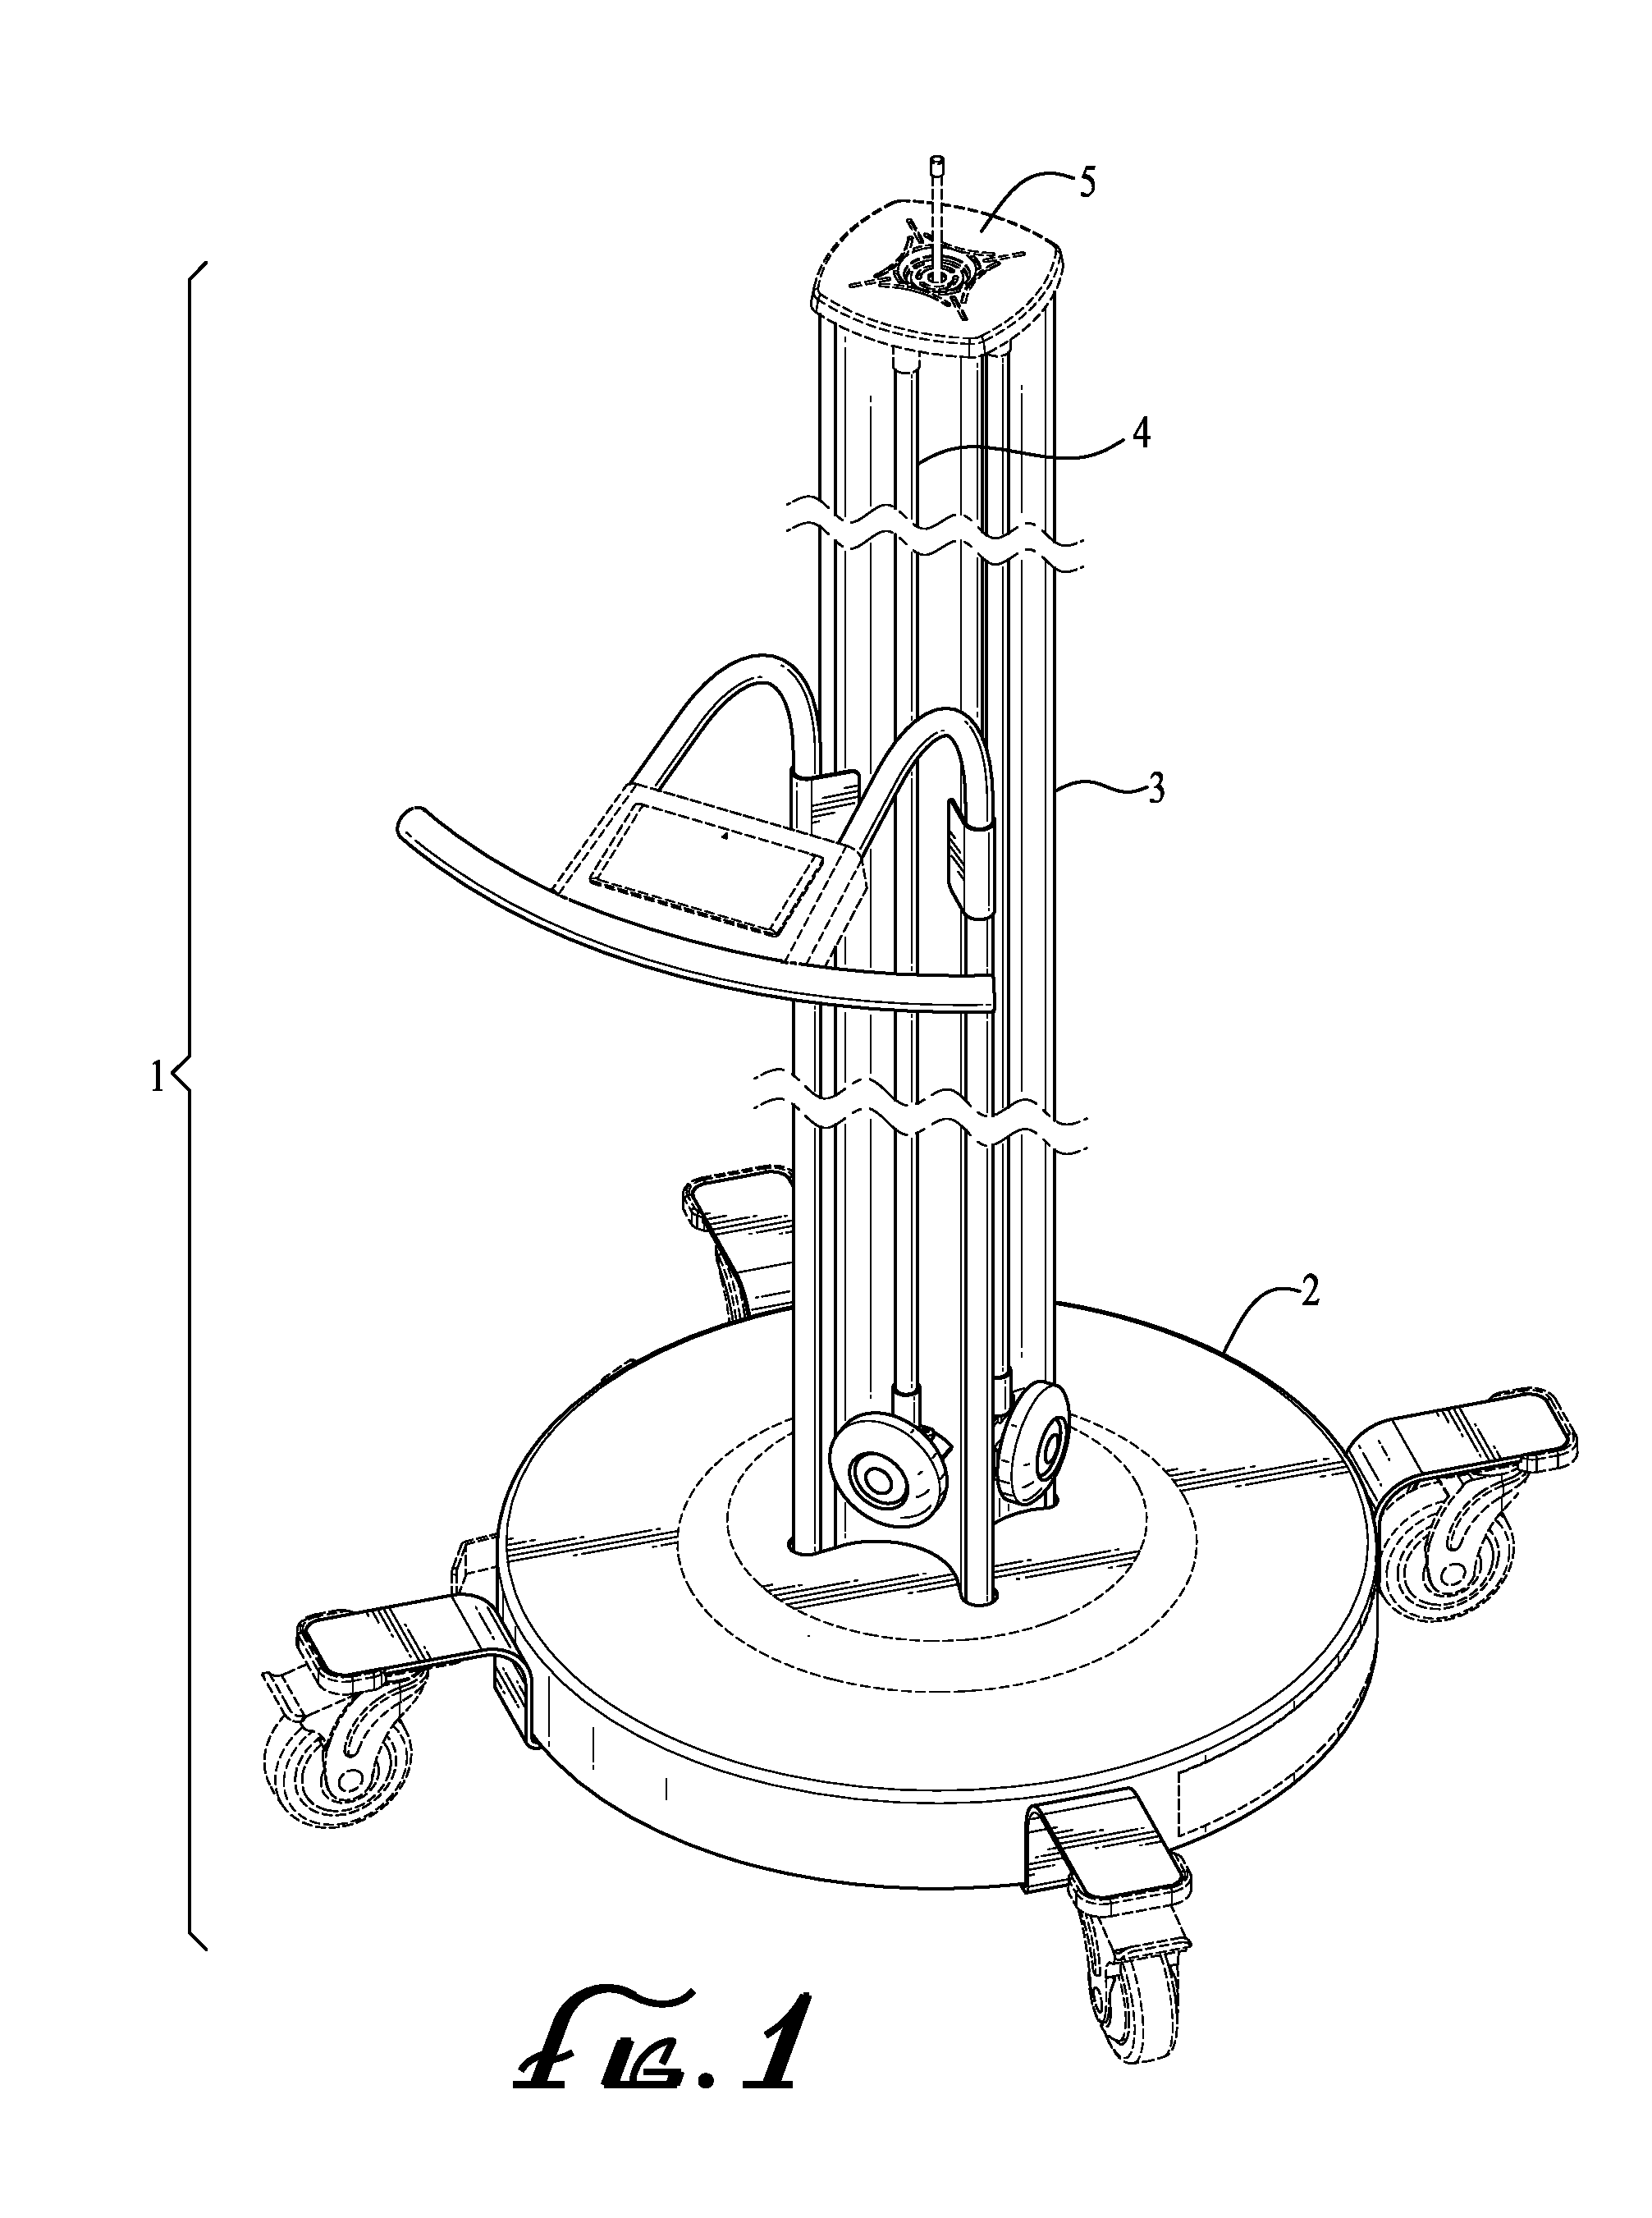 Method and apparatus for optimizing germicidal lamp performance in a disinfection device